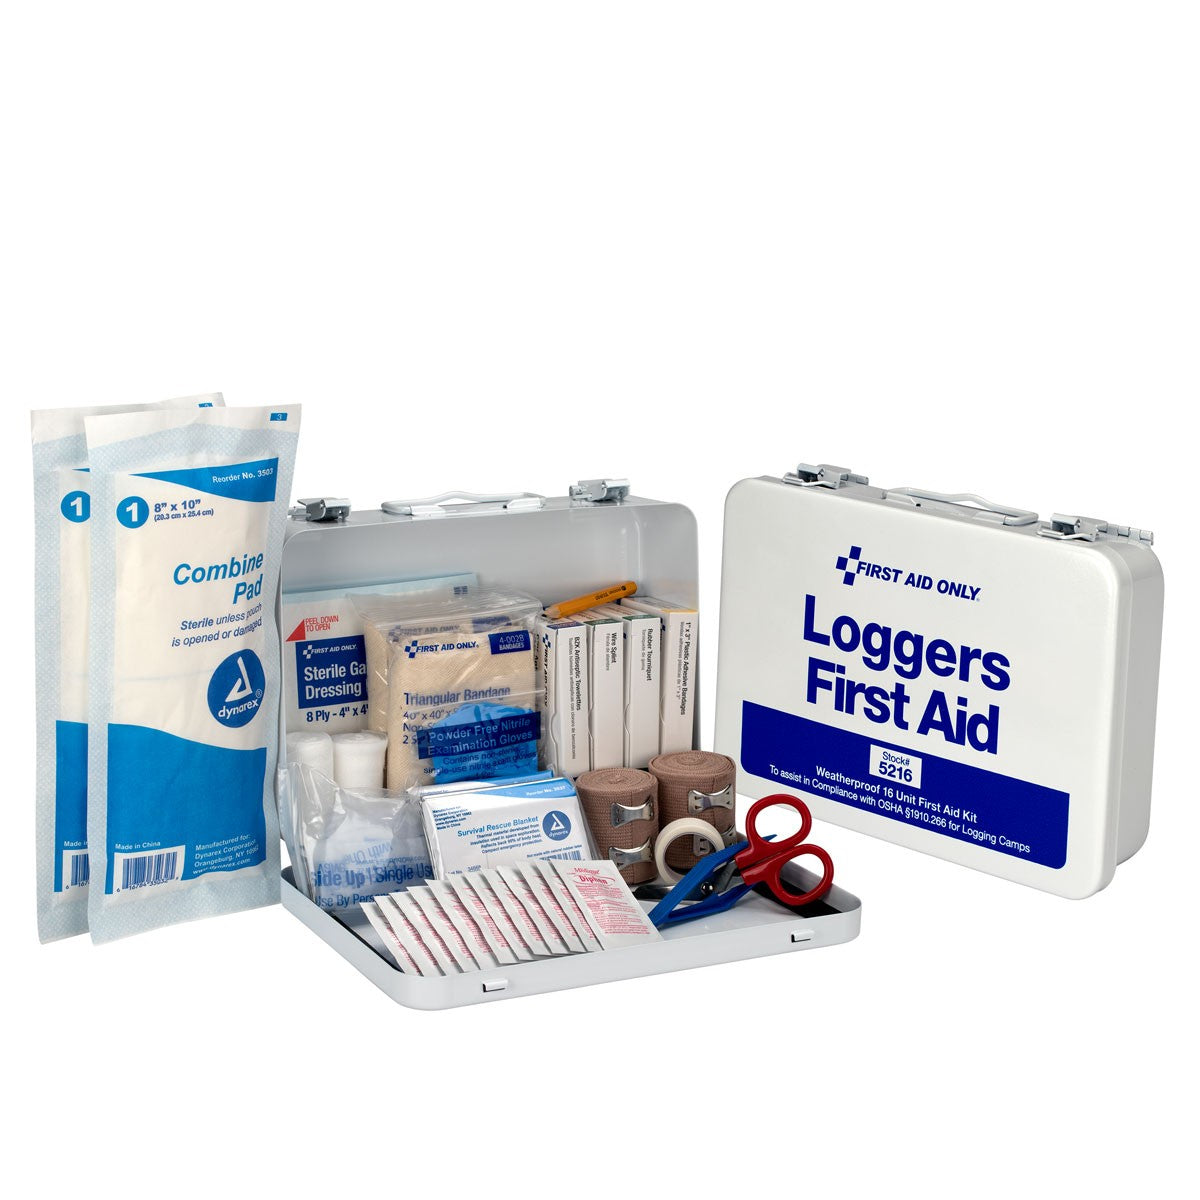 25 Person Loggers First Aid Kit, Metal Weatherproof Case - W-5216